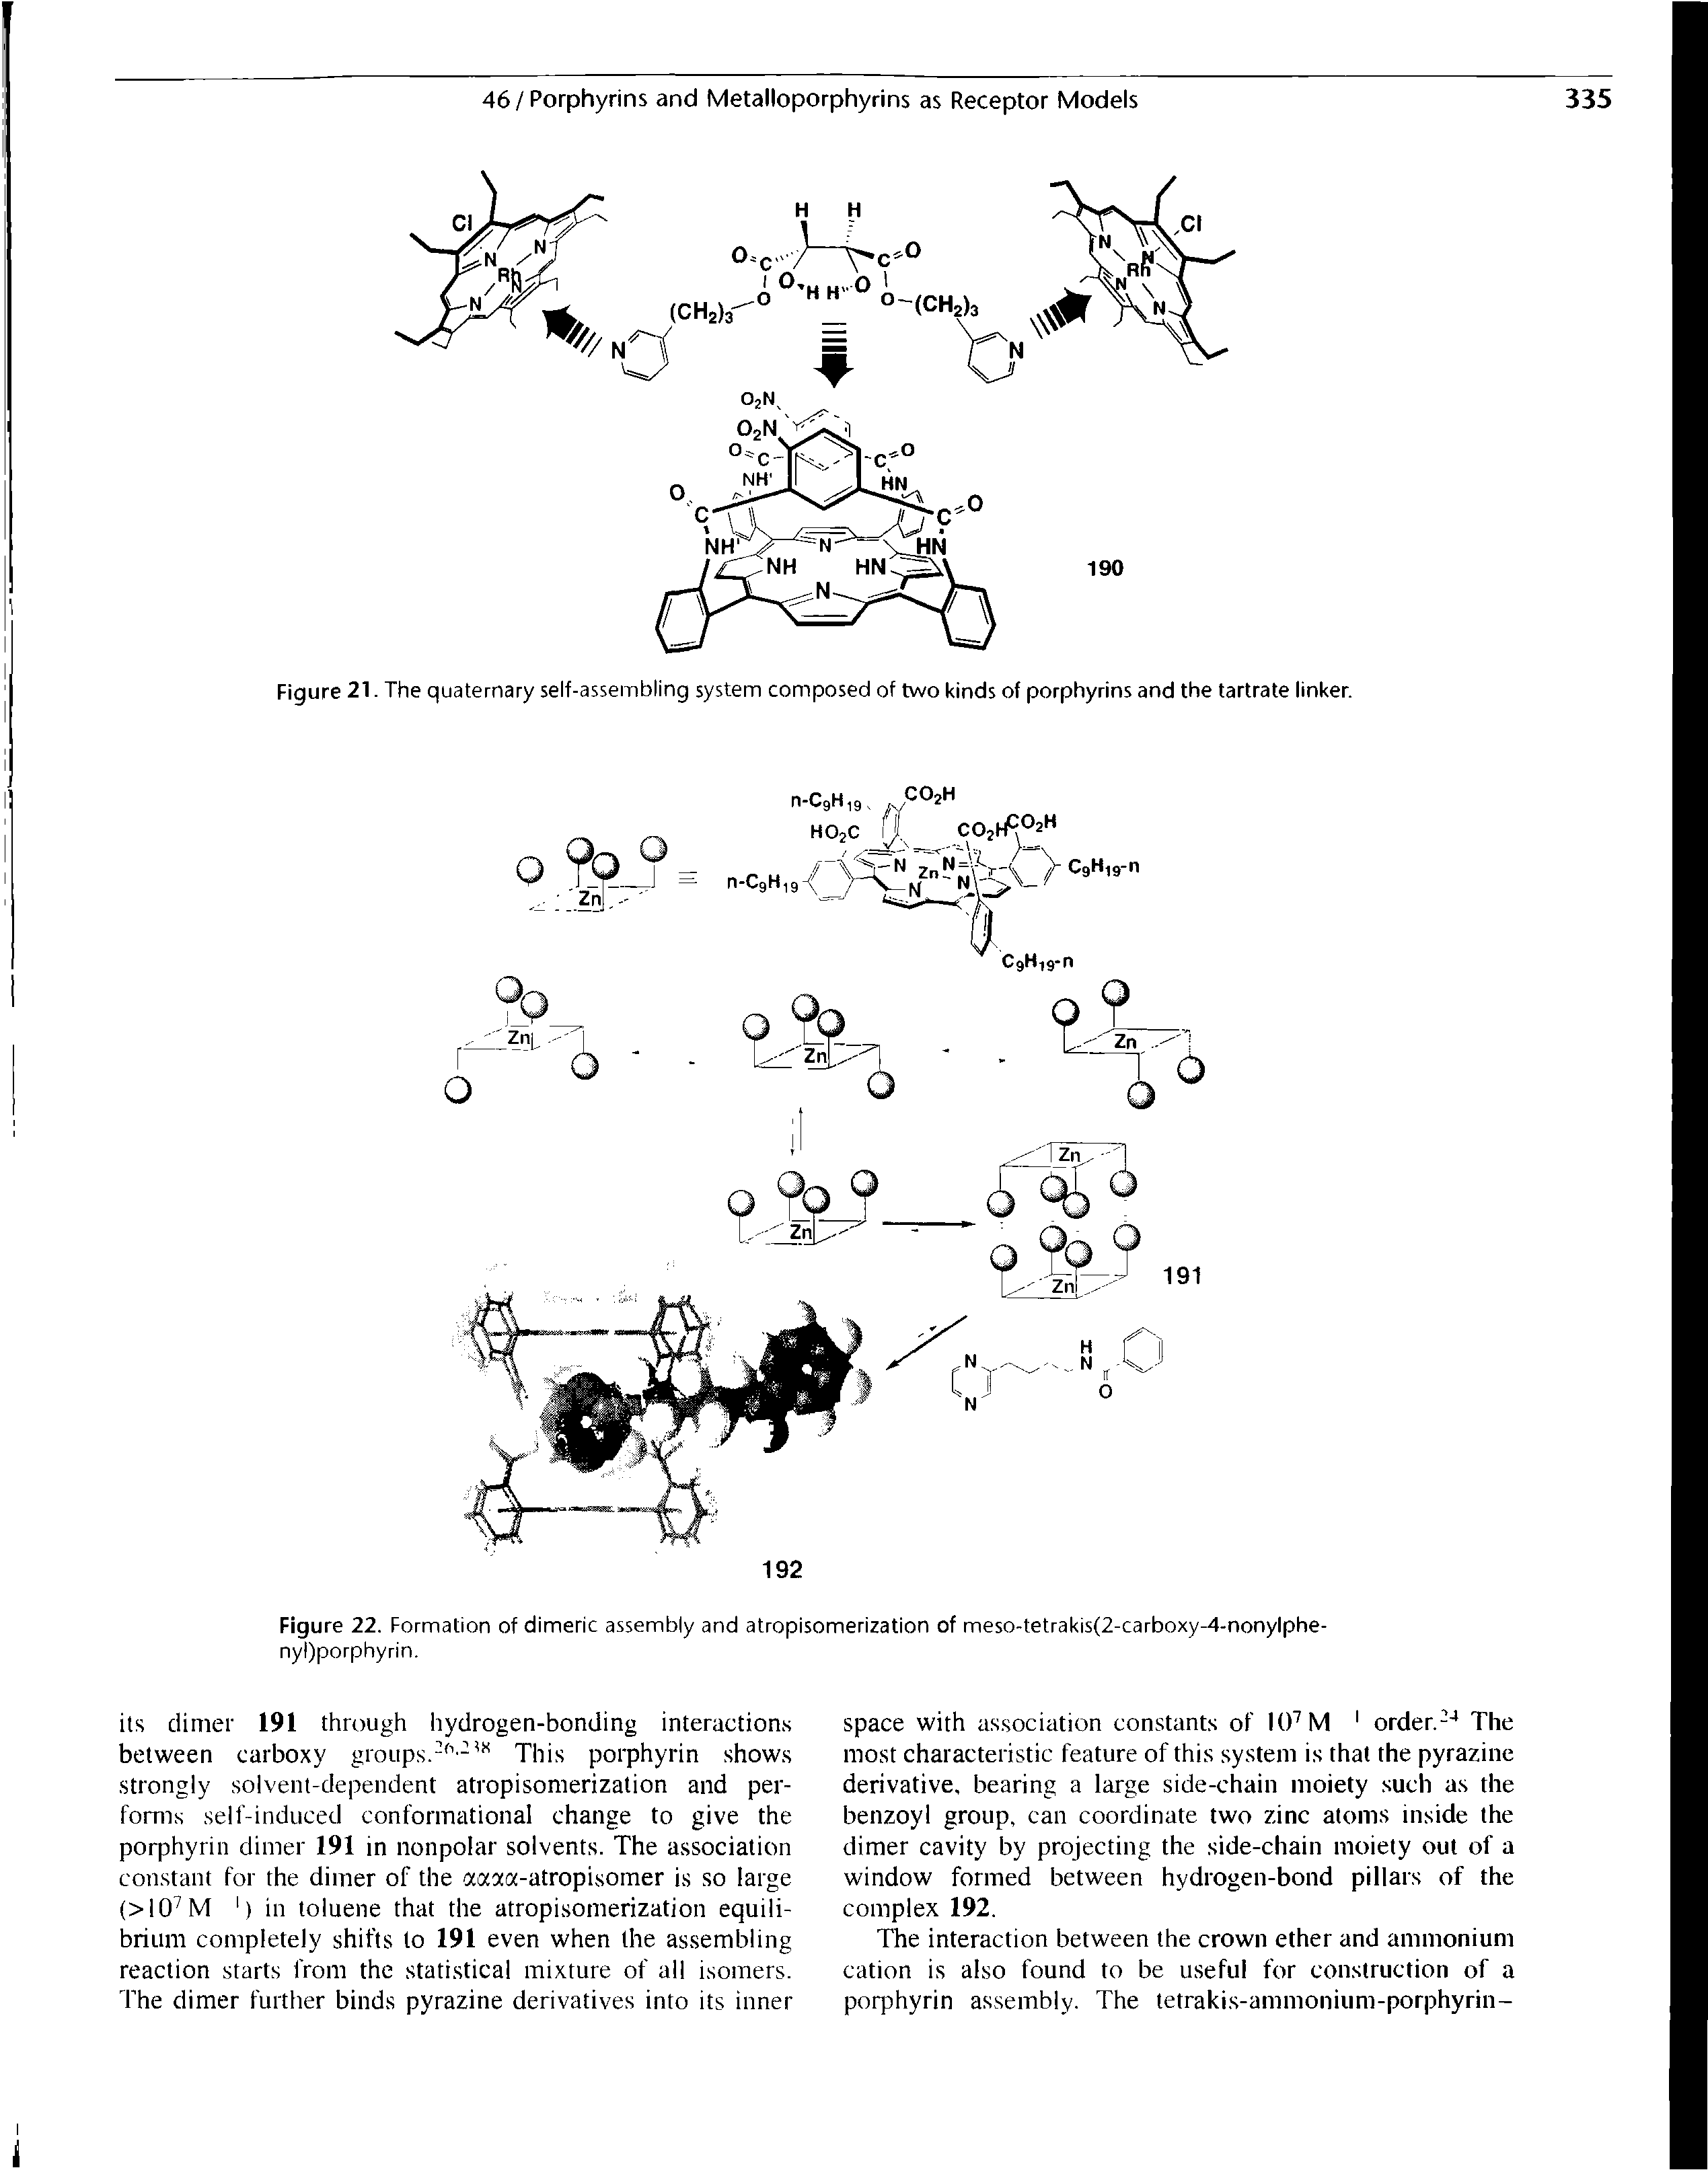 Figure 21. The quaternary self-assembling system composed of two kinds of porphyrins and the tartrate linker.